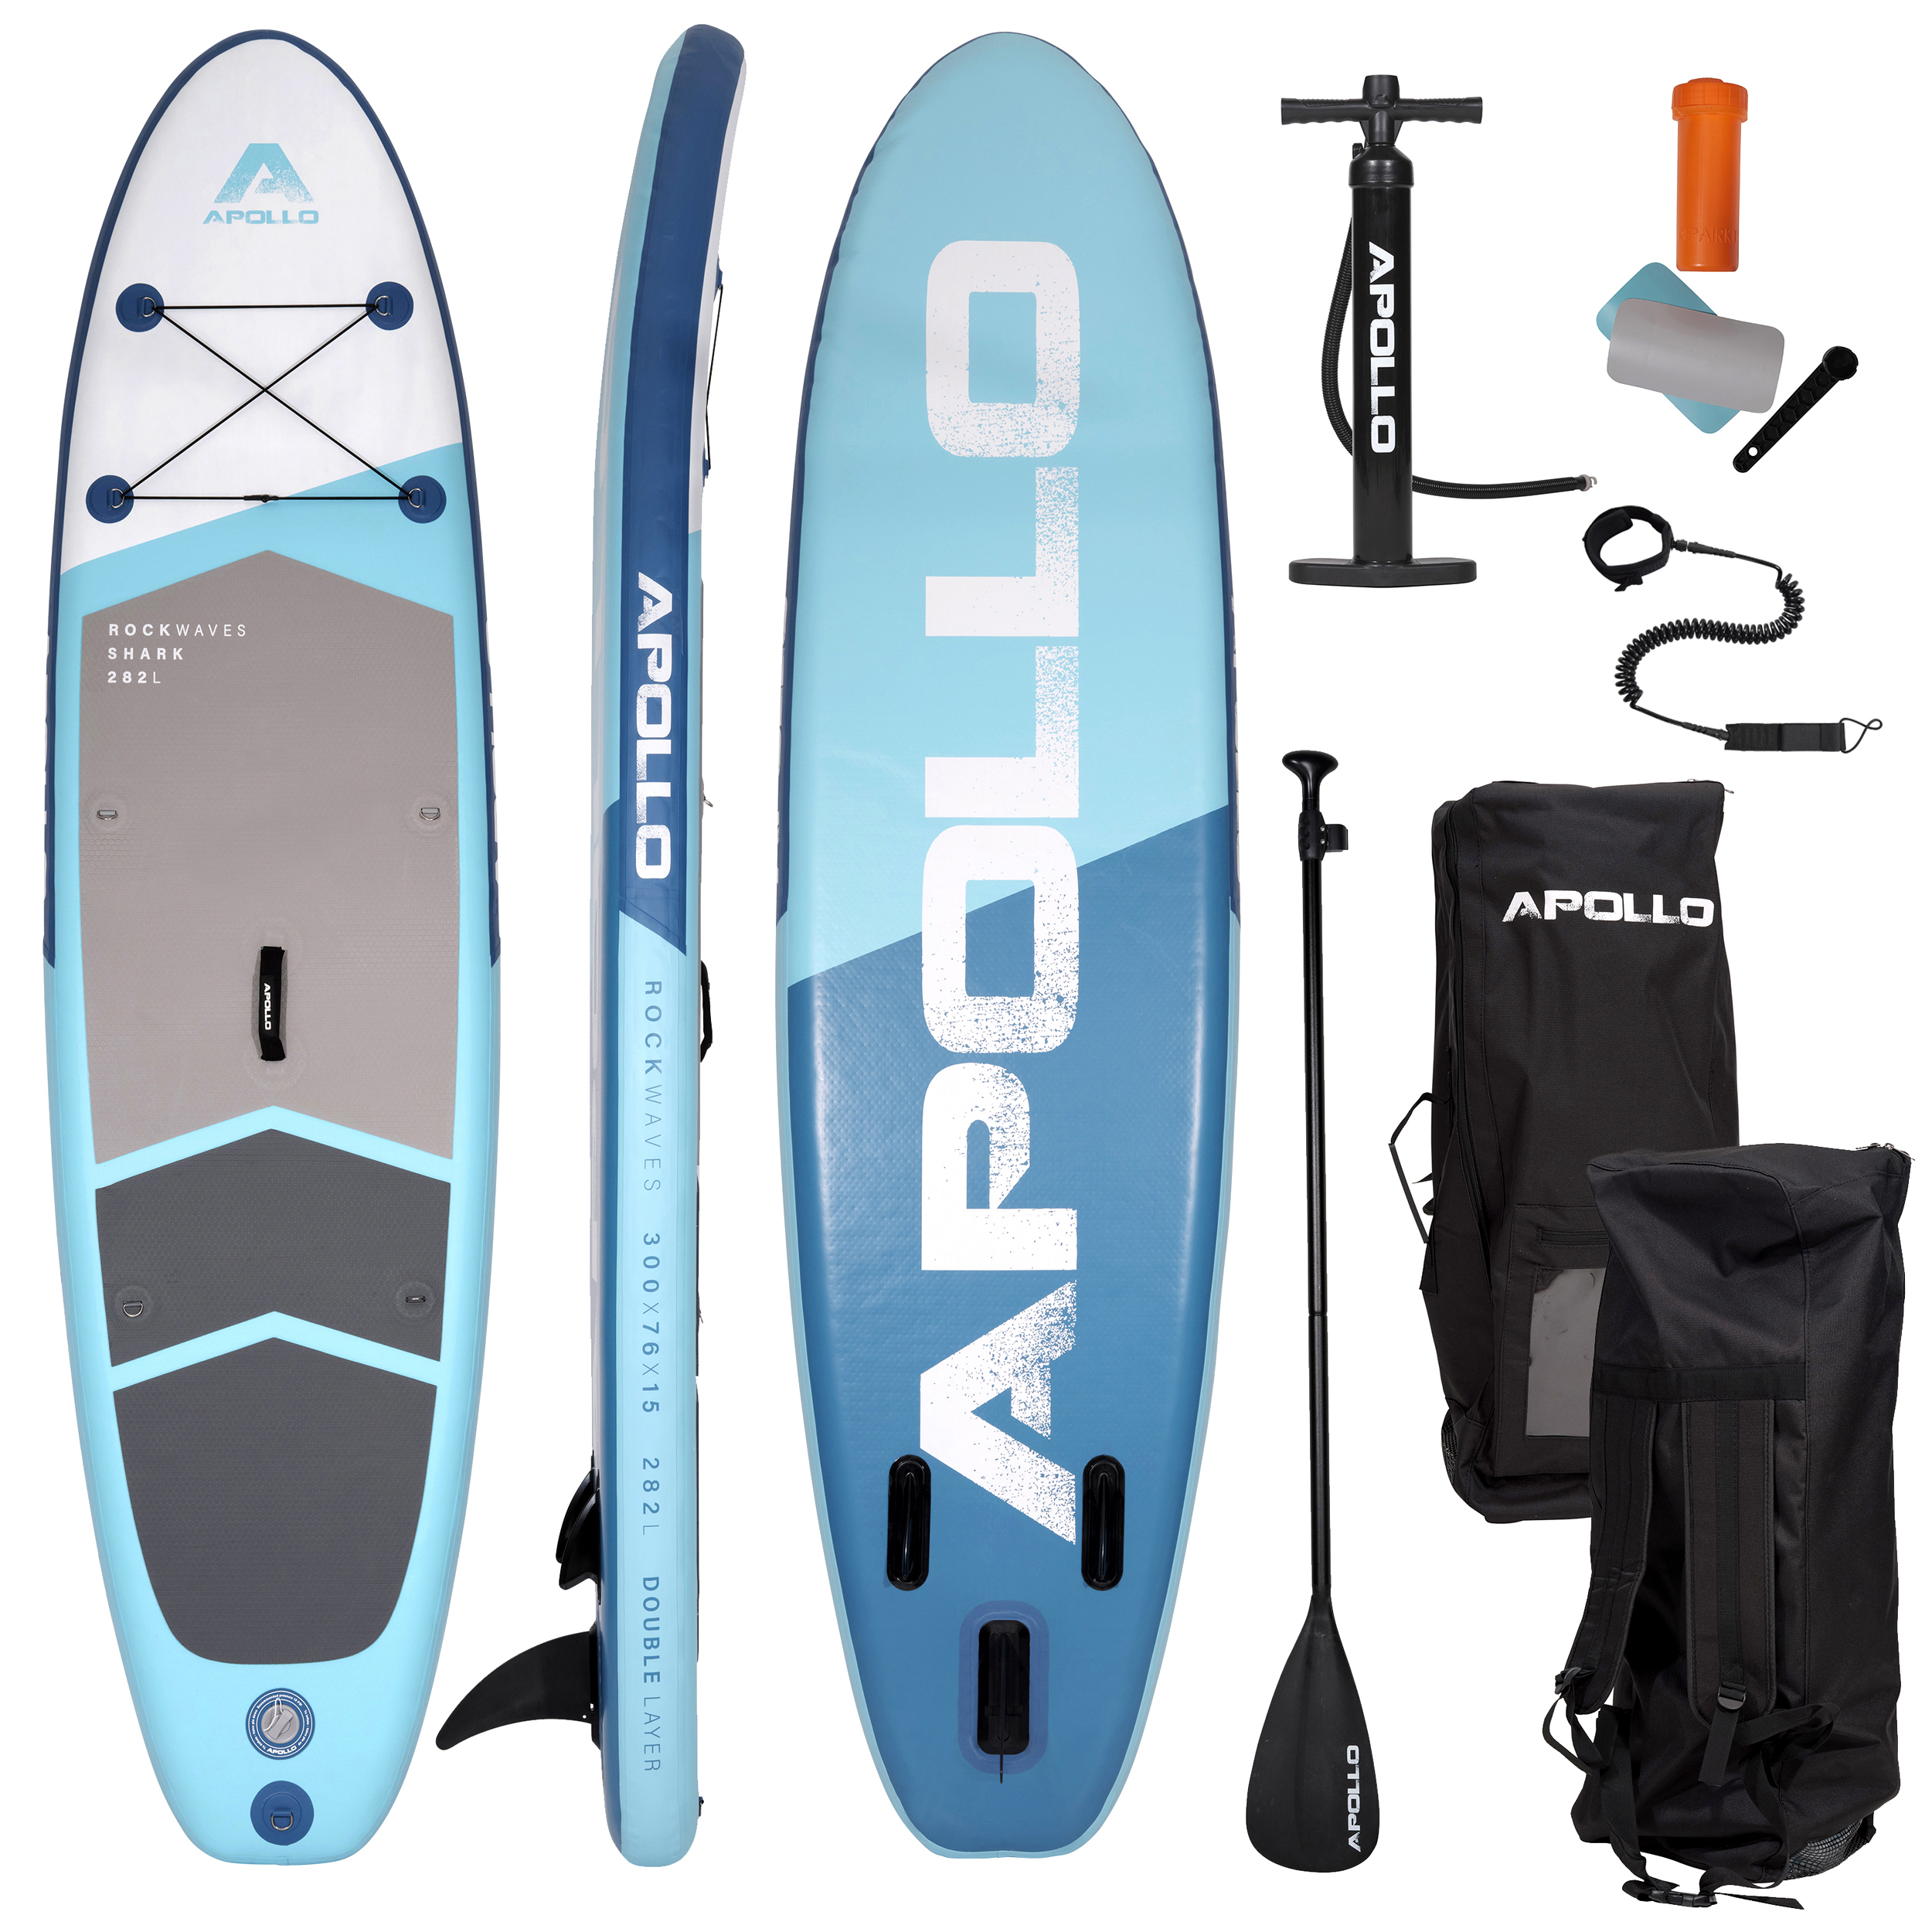 Apollo SUP Board Stand Up Paddle Board Komplettset "SHARK" 3 m